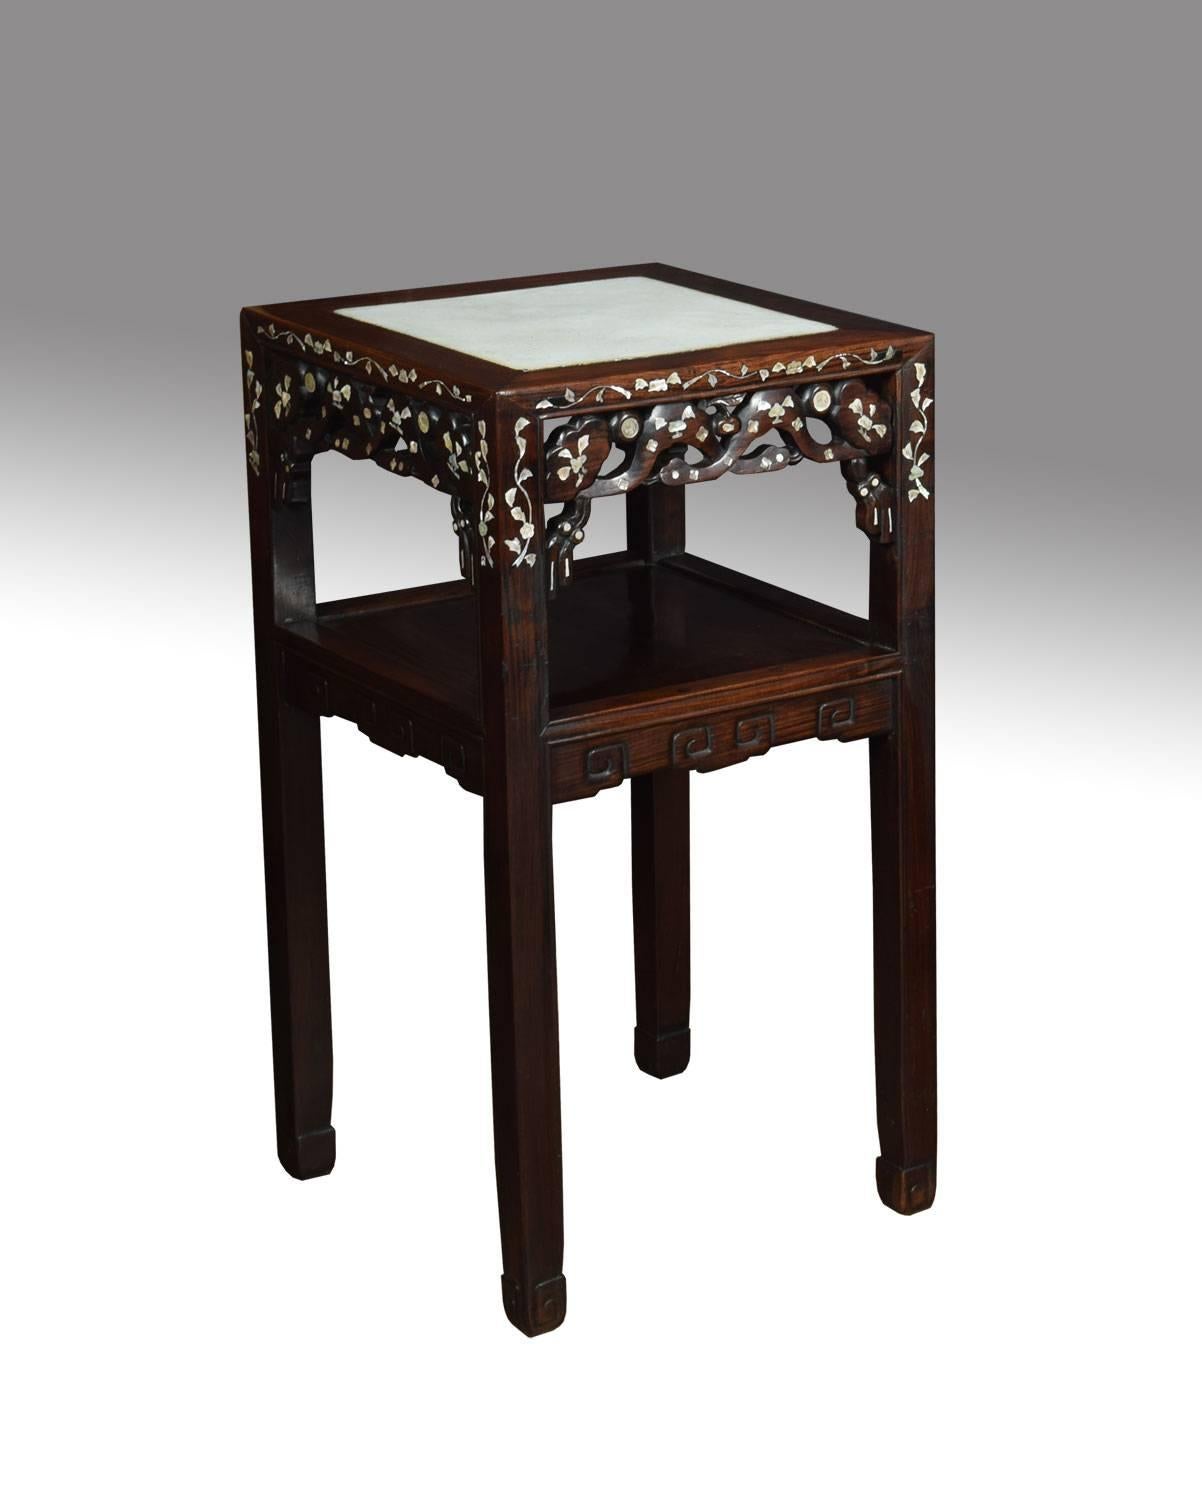 Pair of Chinese inlaid urn stands, the tops inset with white marble, above pierced sides decorated with mother of pearl foliated motifs raised on square supports united by under tier.
Dimension:
Height 31 inches
Width 16 inches
Depth 16 inches.